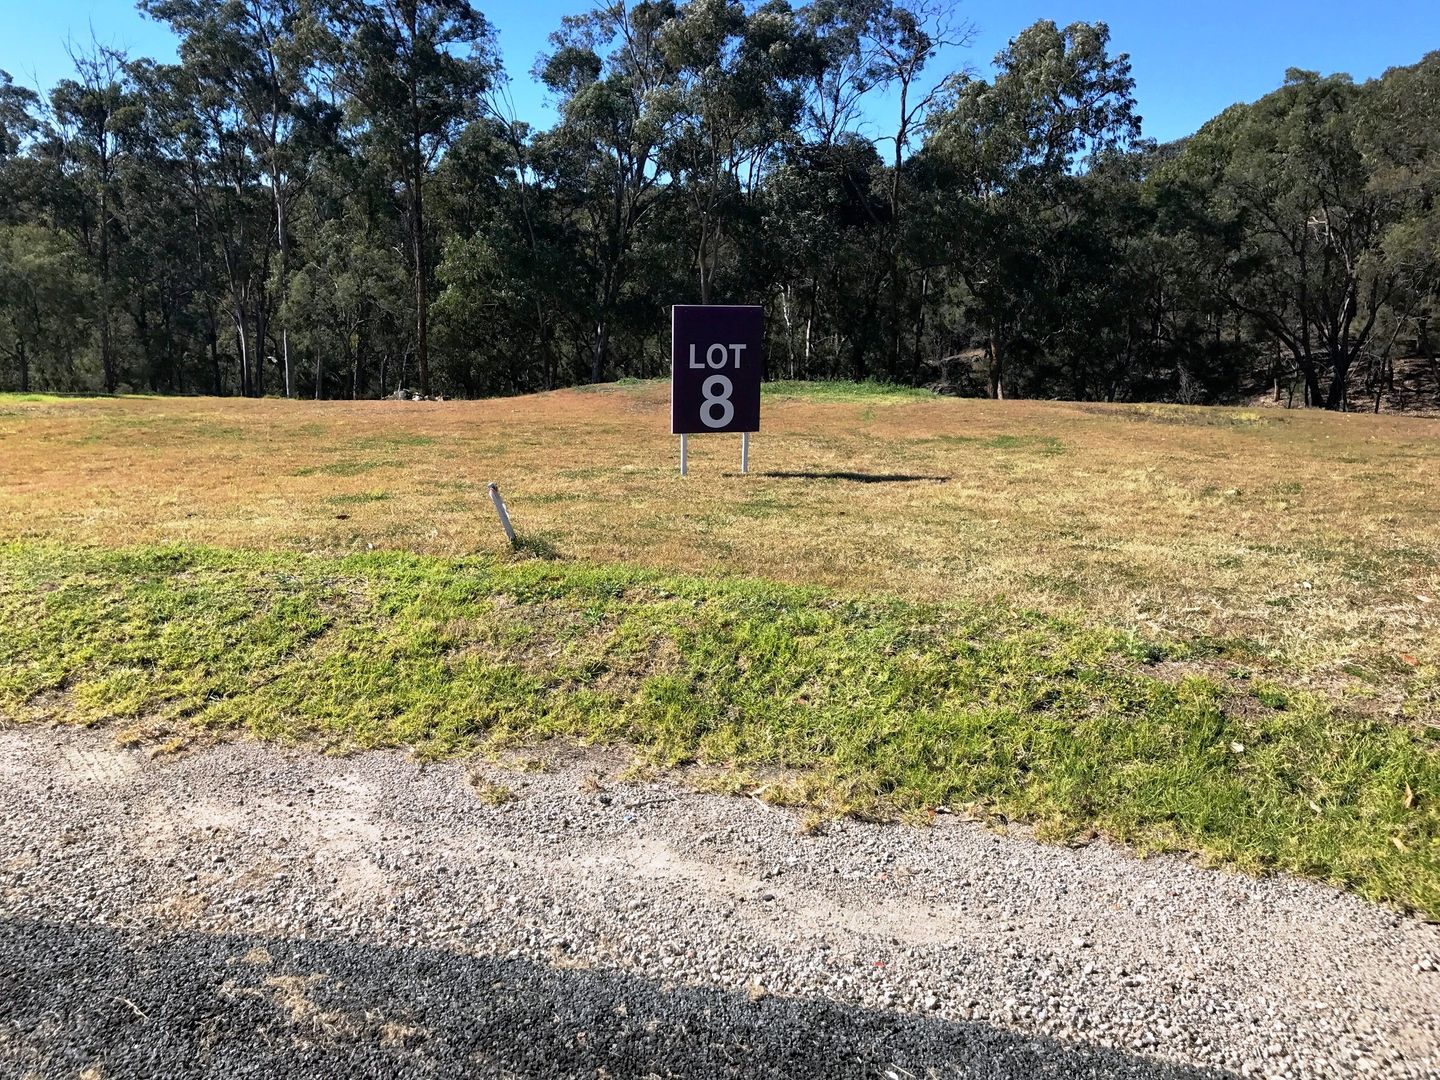 Lot 8 at 615 Sackville Ferry Road, Sackville North NSW 2756, Image 1